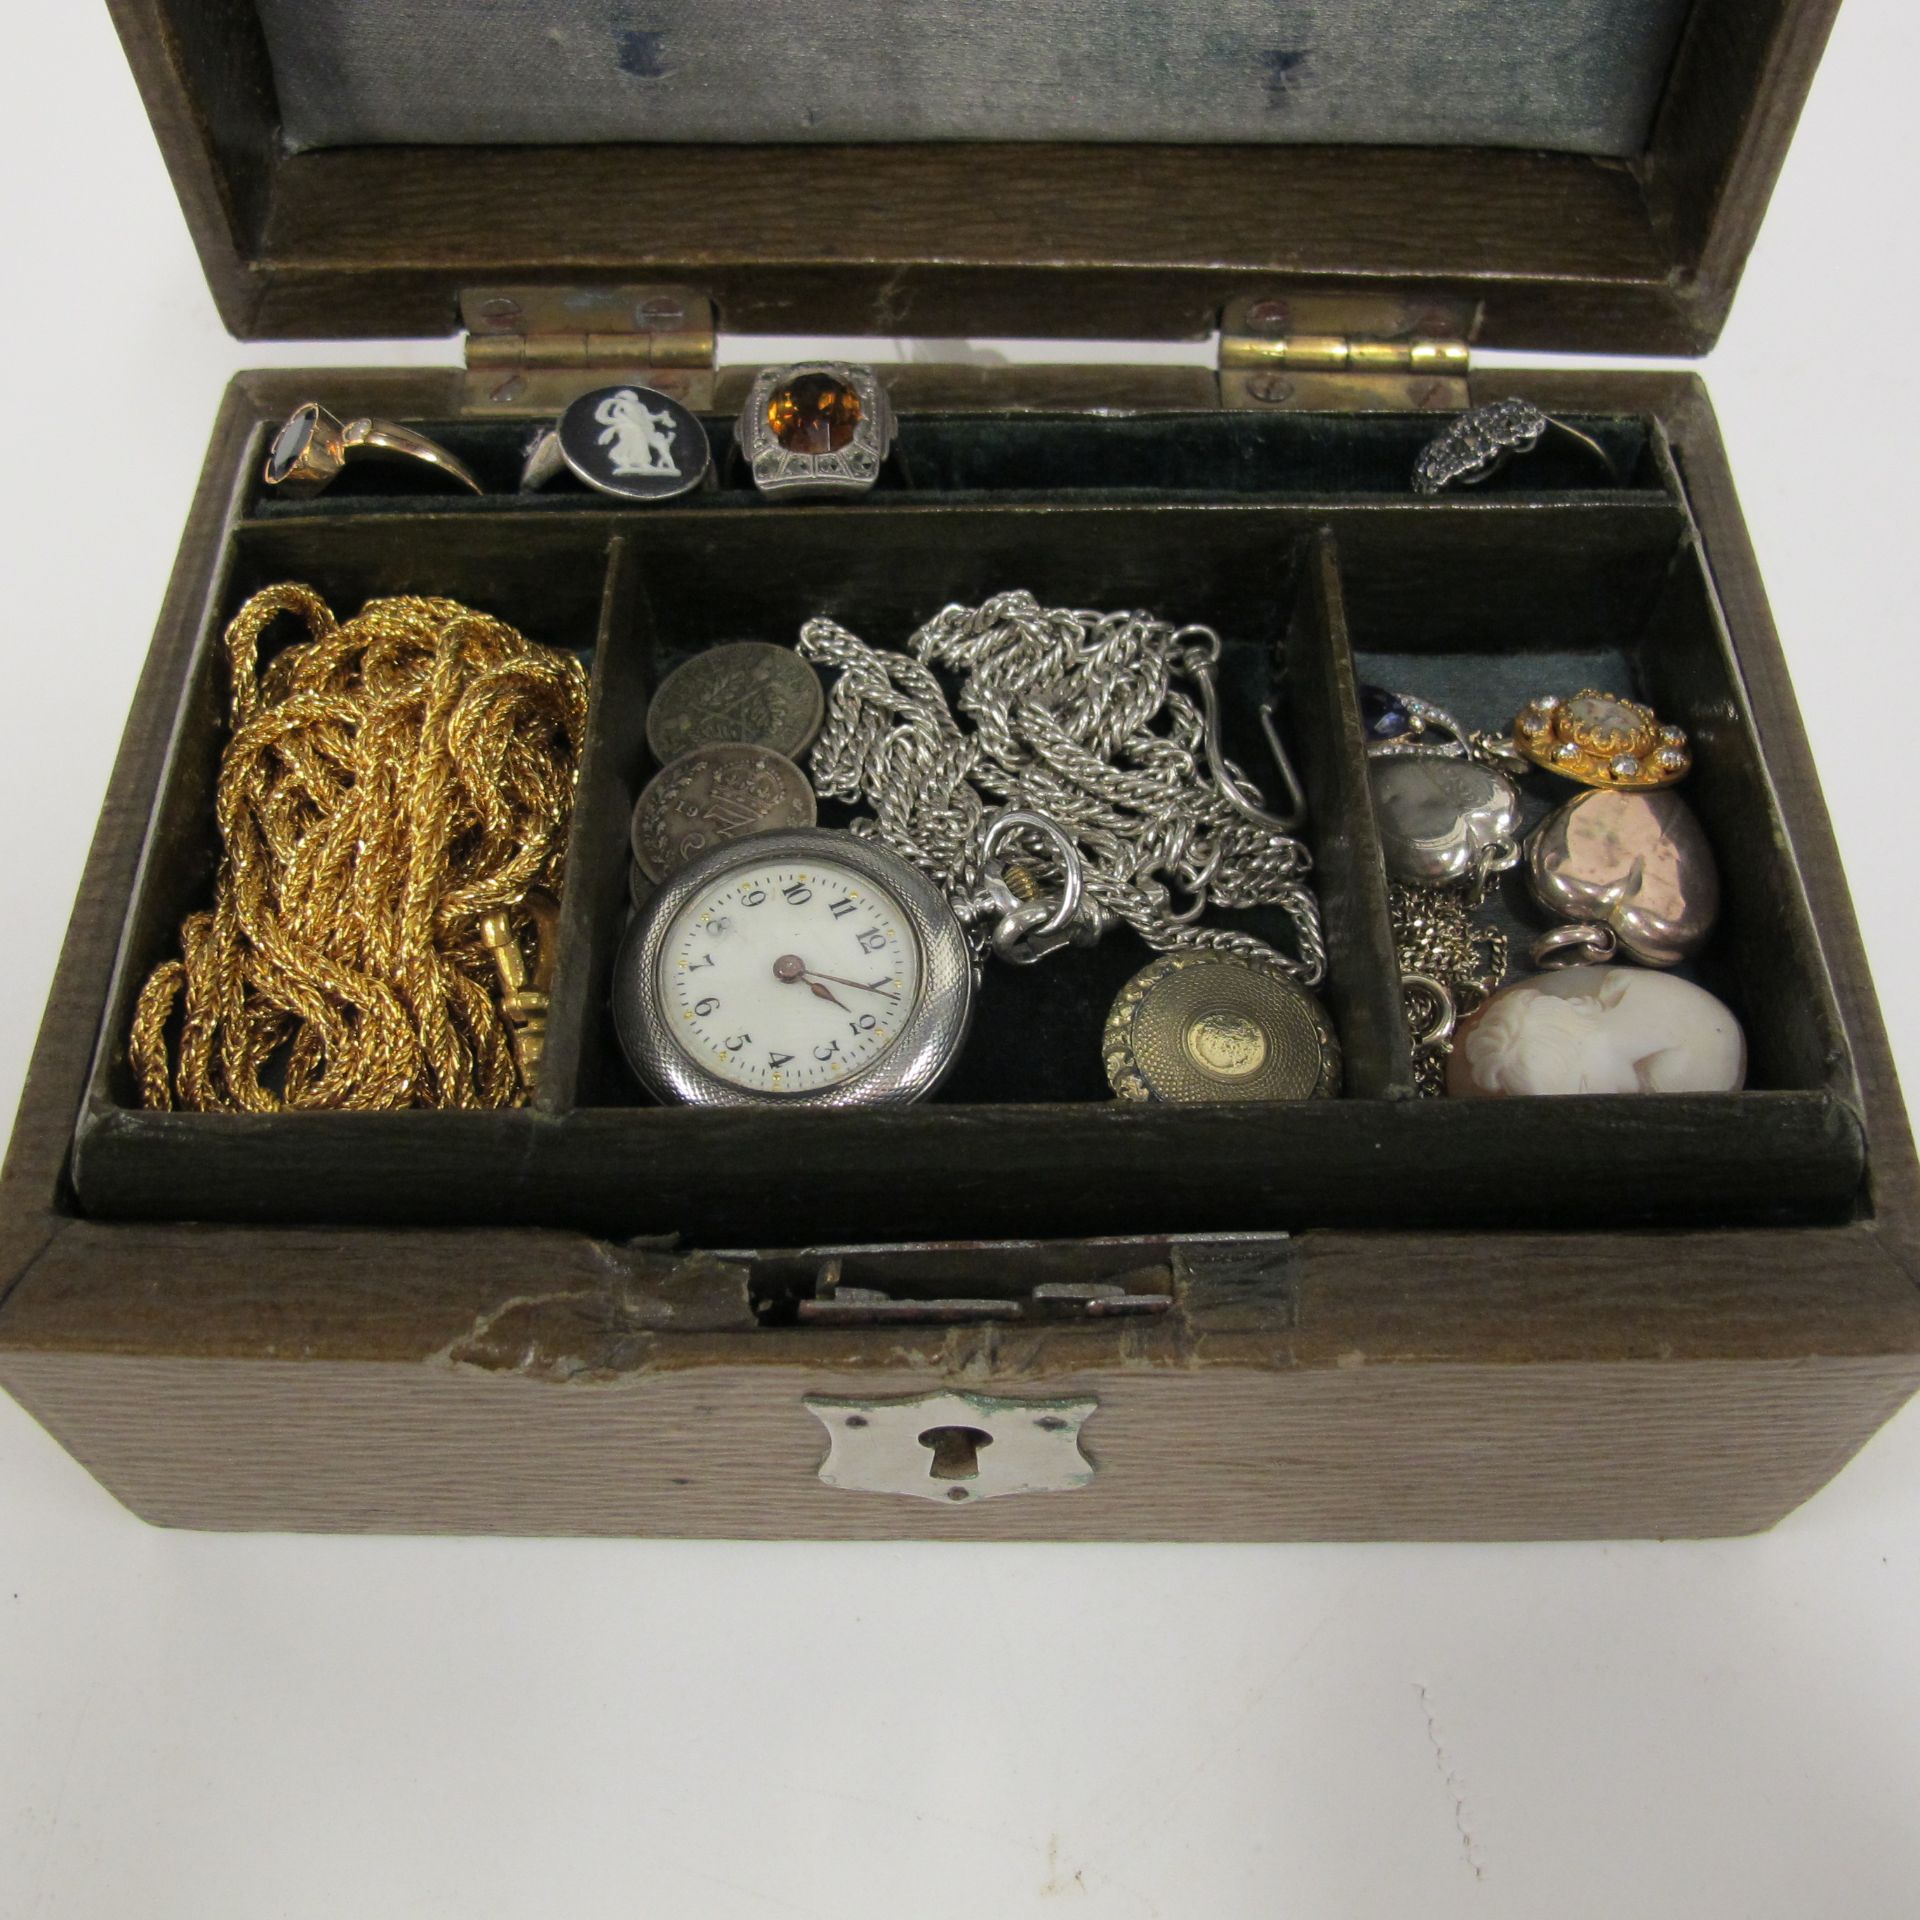 Vintage Jewellery Box including antique and vintage items - some gold and silver (est £150-£300)